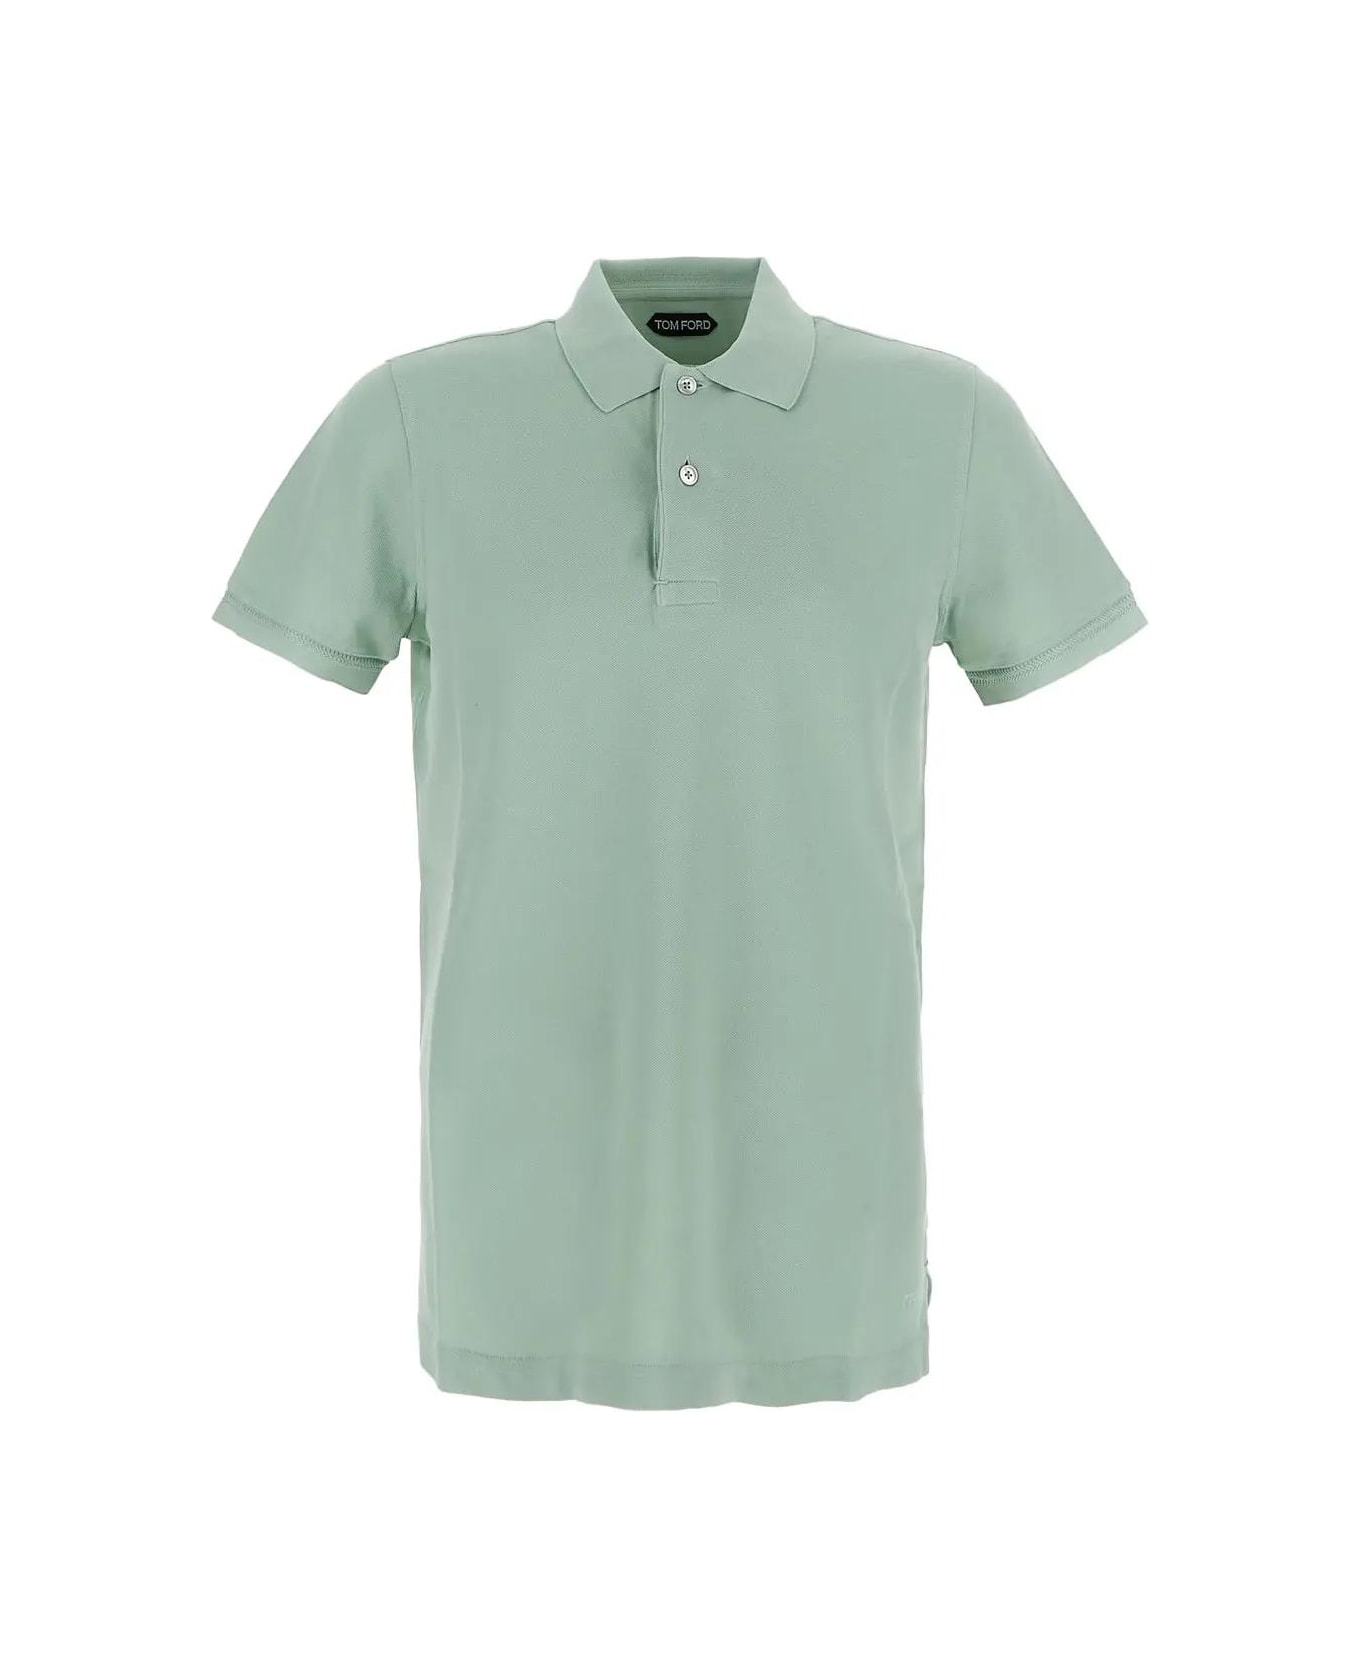 Tom Ford Cotton Polo - Pale mint